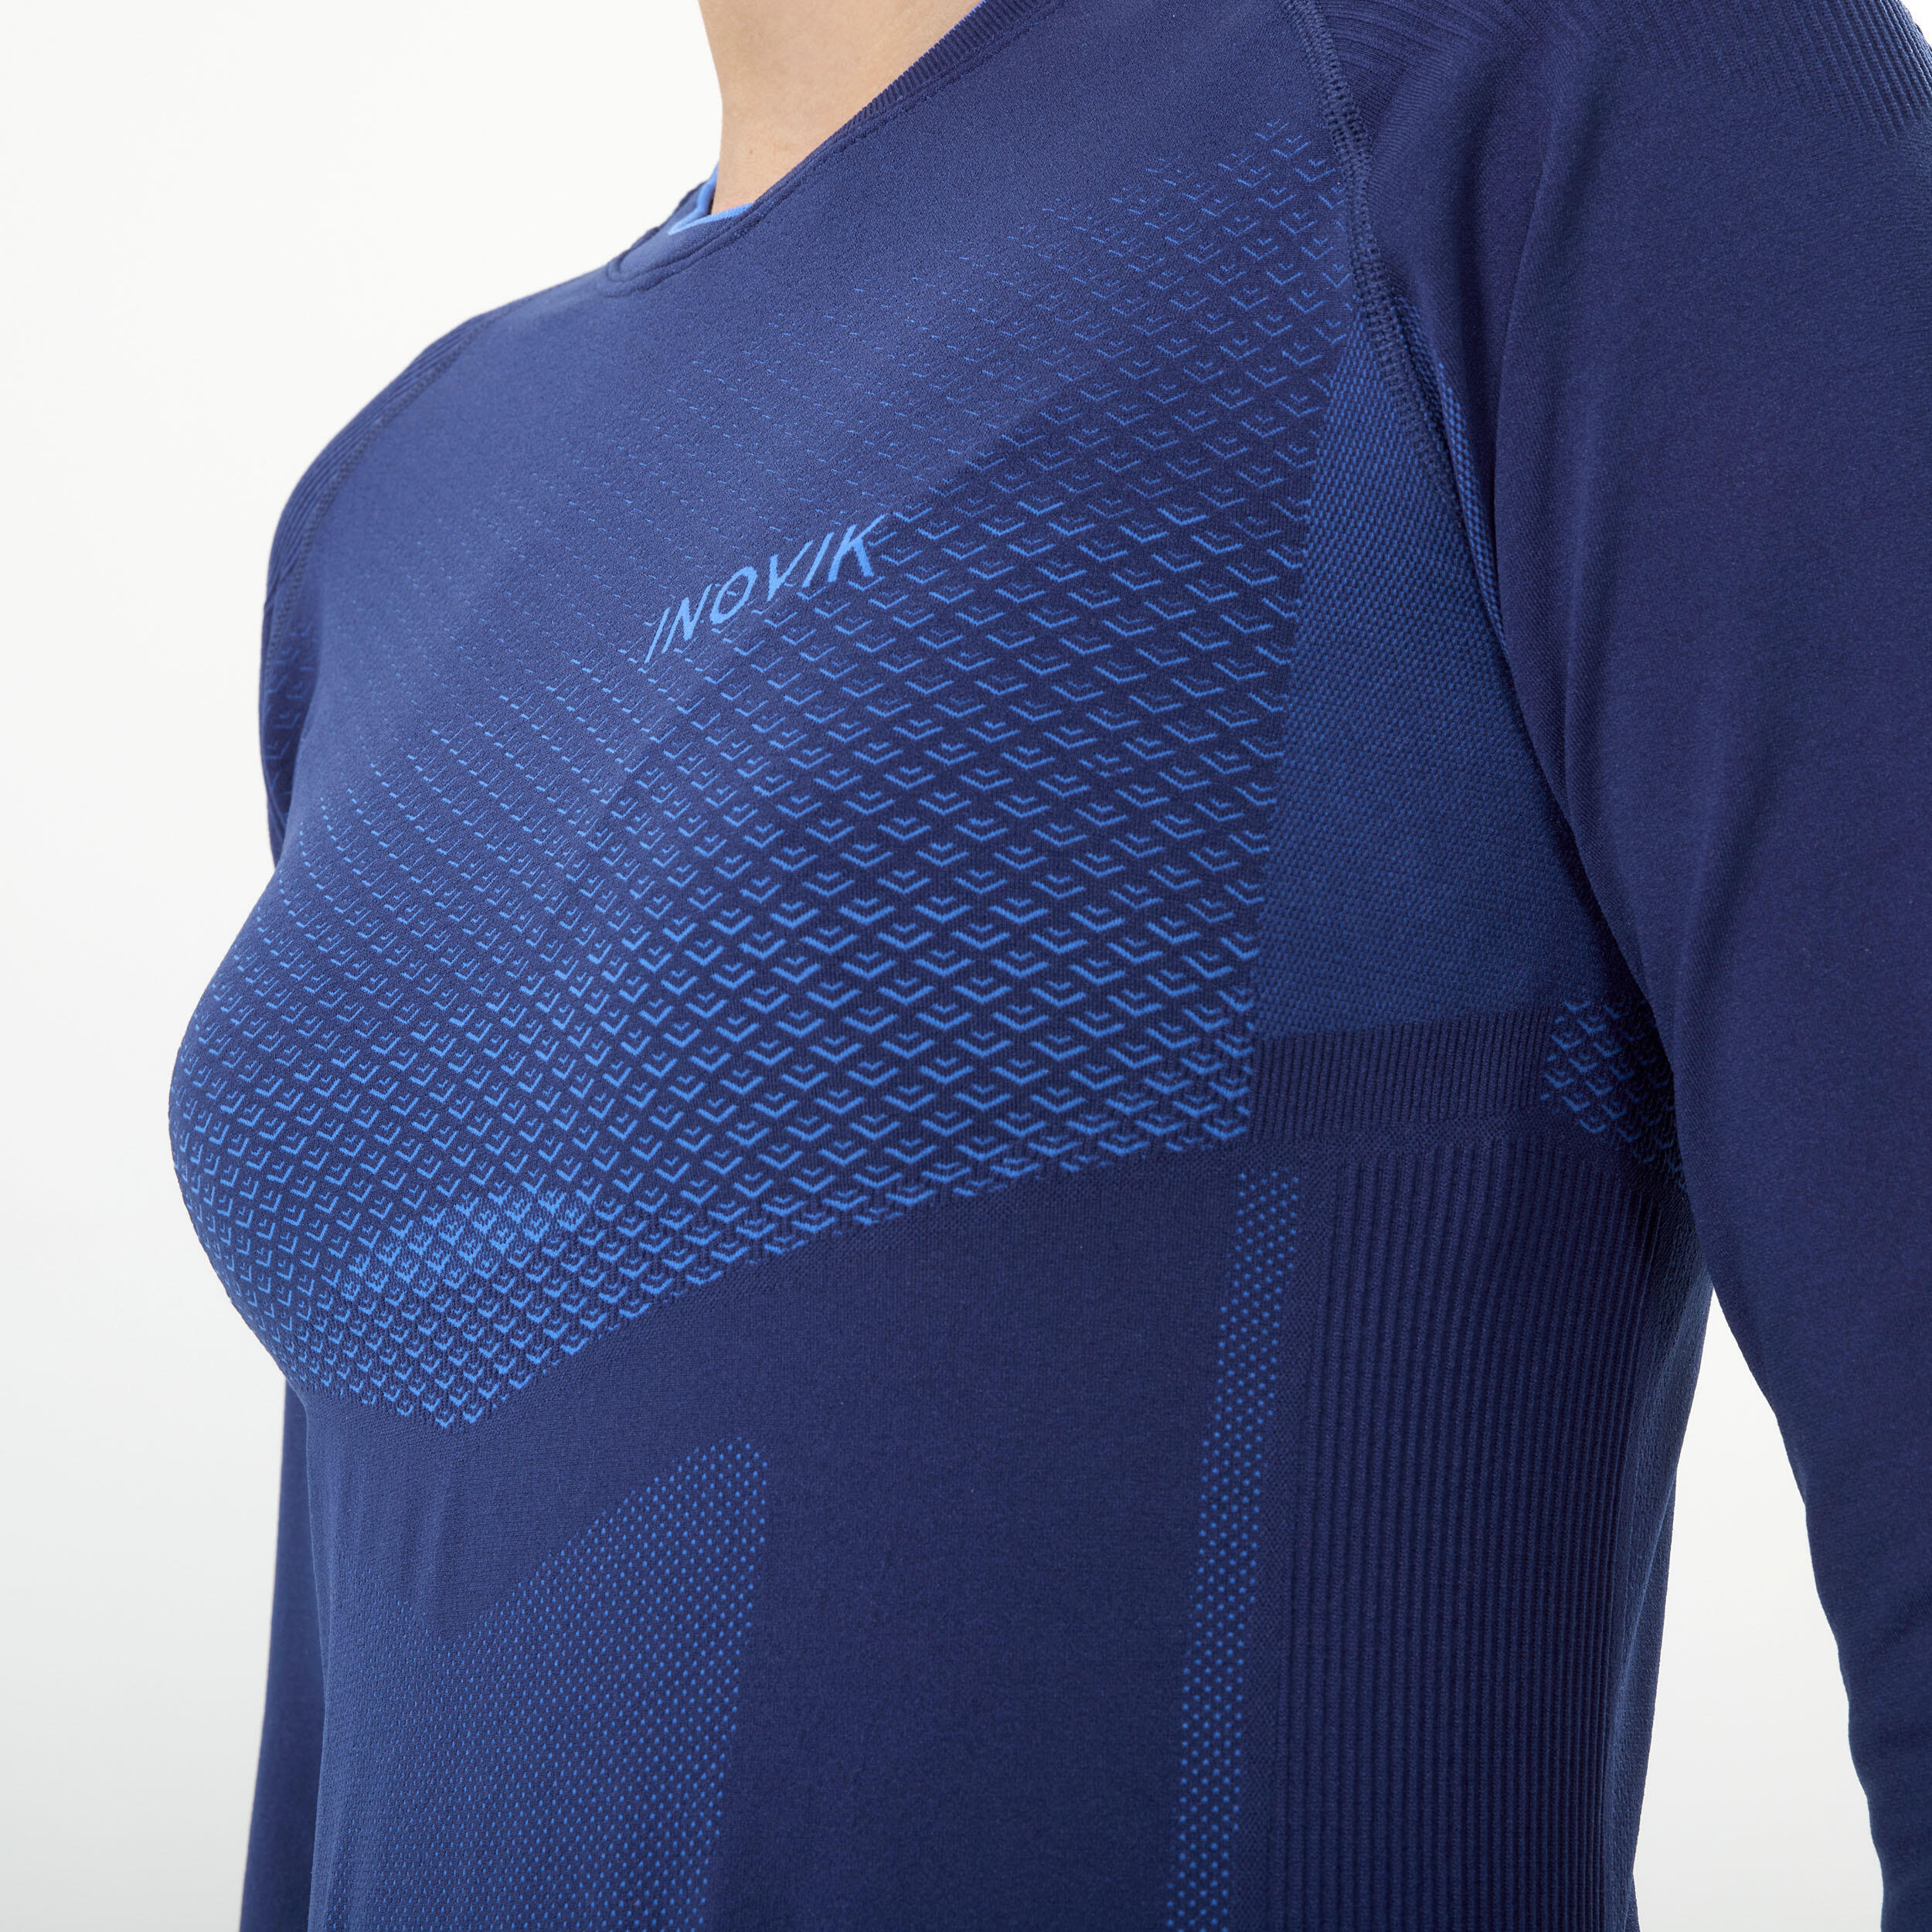 WOMEN’S THERMAL CROSS-COUNTRY SKI BASE LAYER 900 – BLUE 6/7